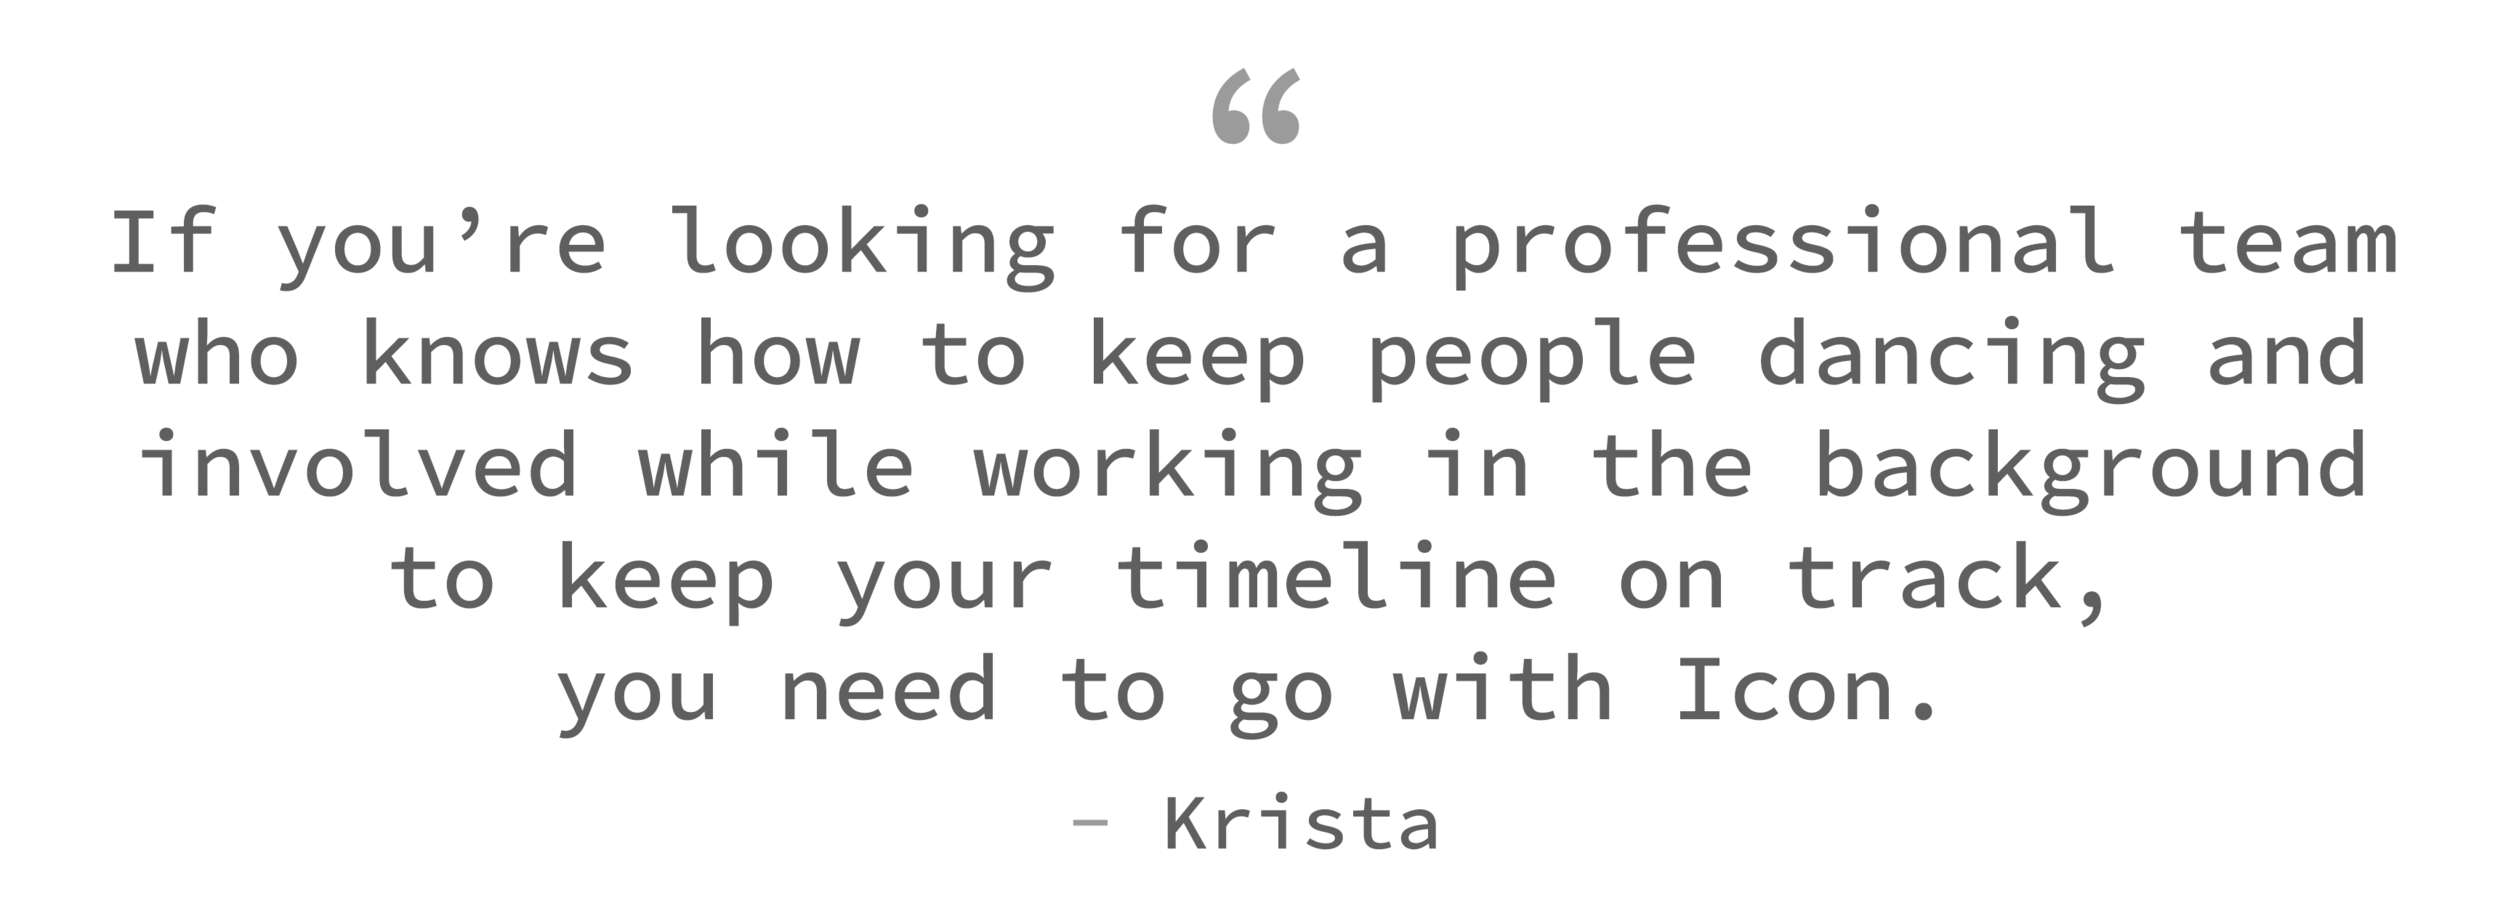 Review_Krista.png